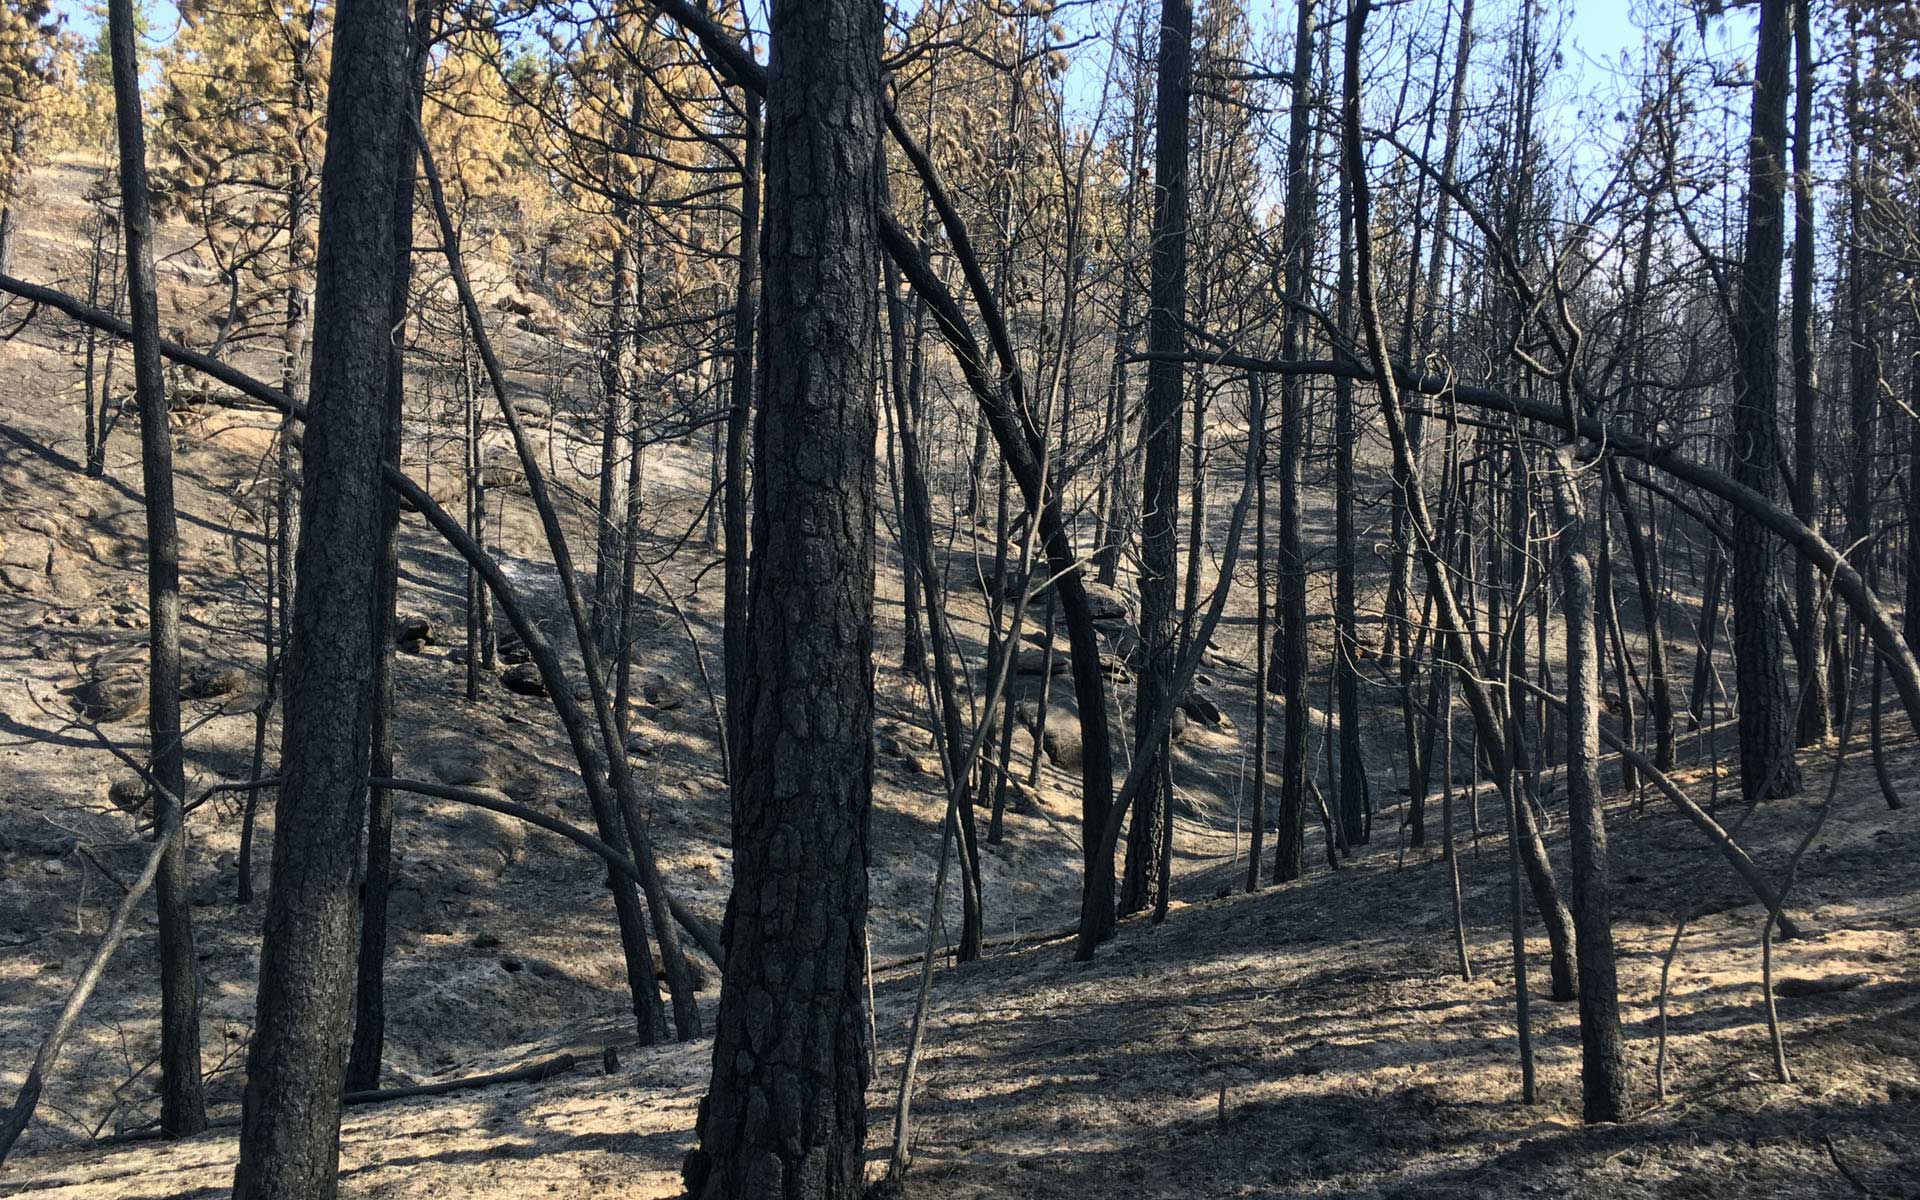 Impacts of Upriver Beacon Fire on Camp Sekani Park